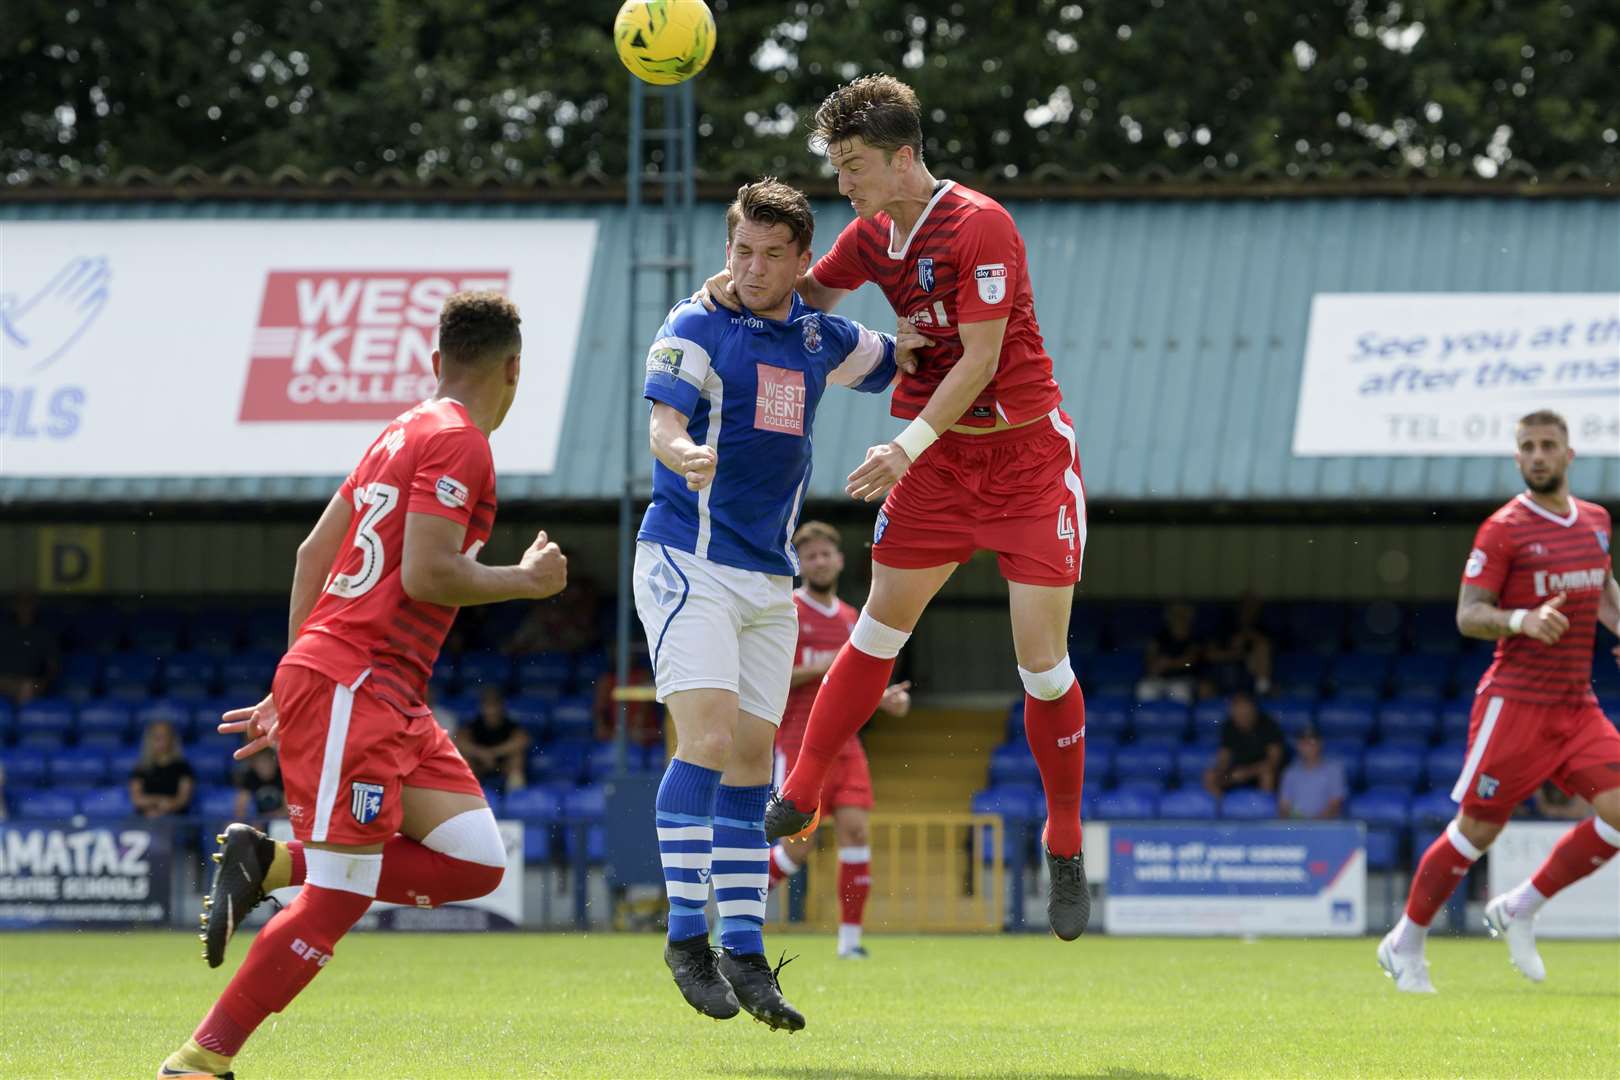 Alex Lacey gets to a high ball first. Picture: Andy Payton